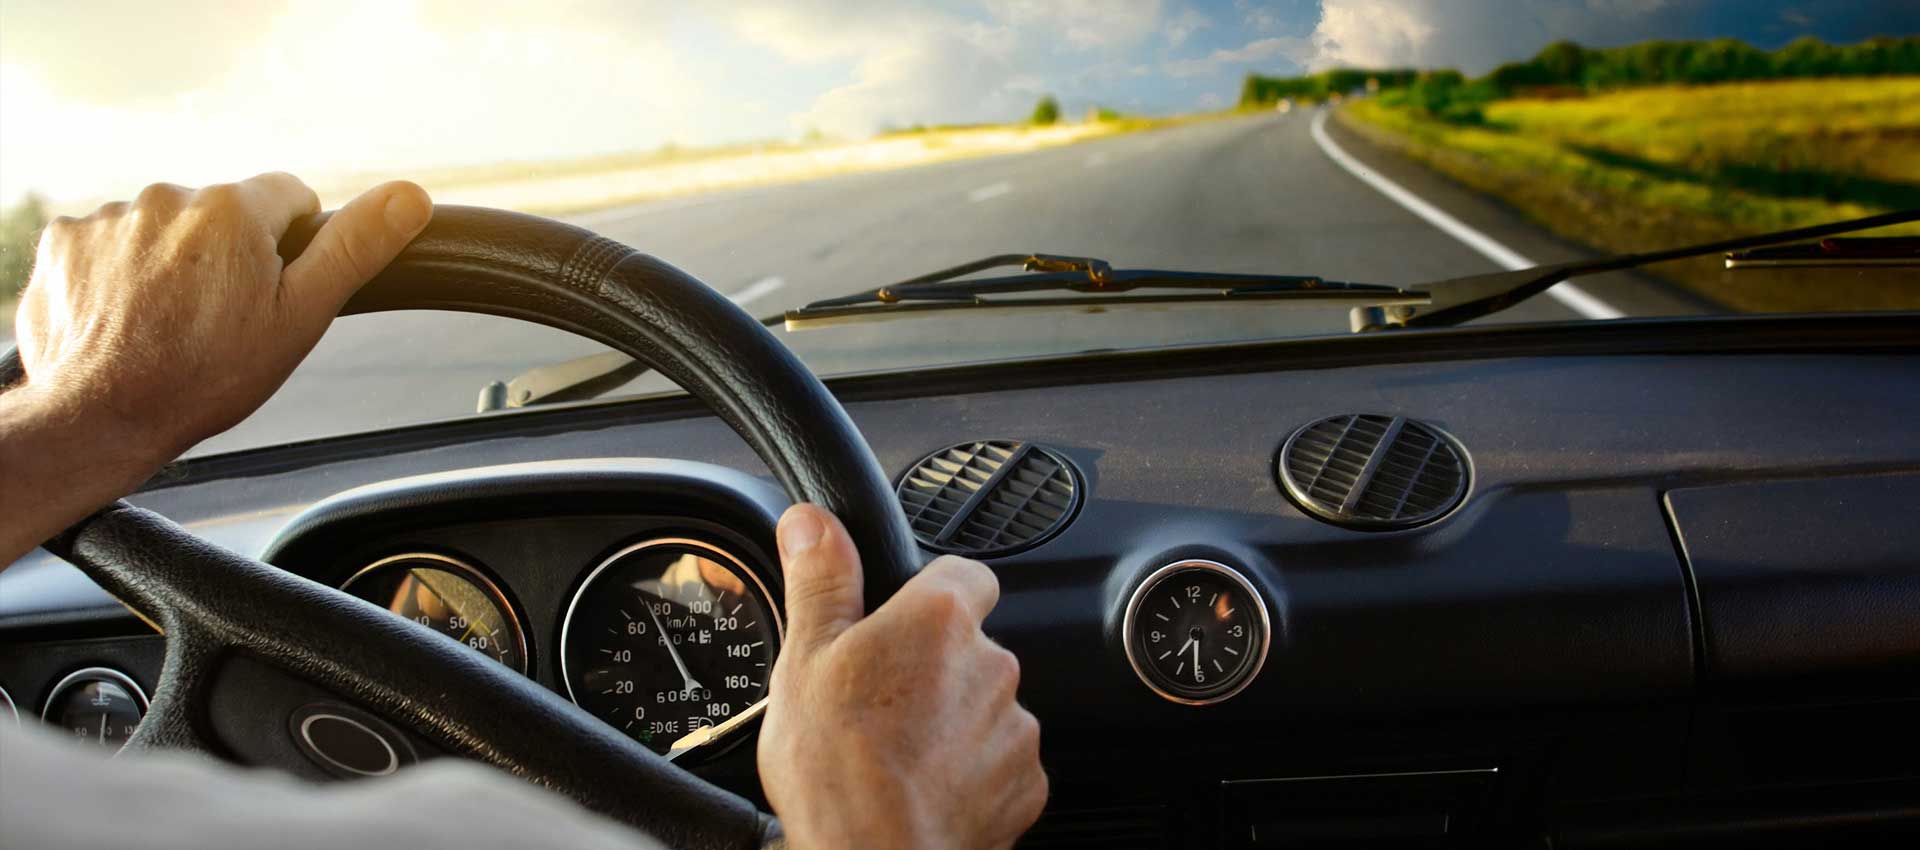 Why Enrolling Yourself in A Driving School Is Important? Top 5 Reasons